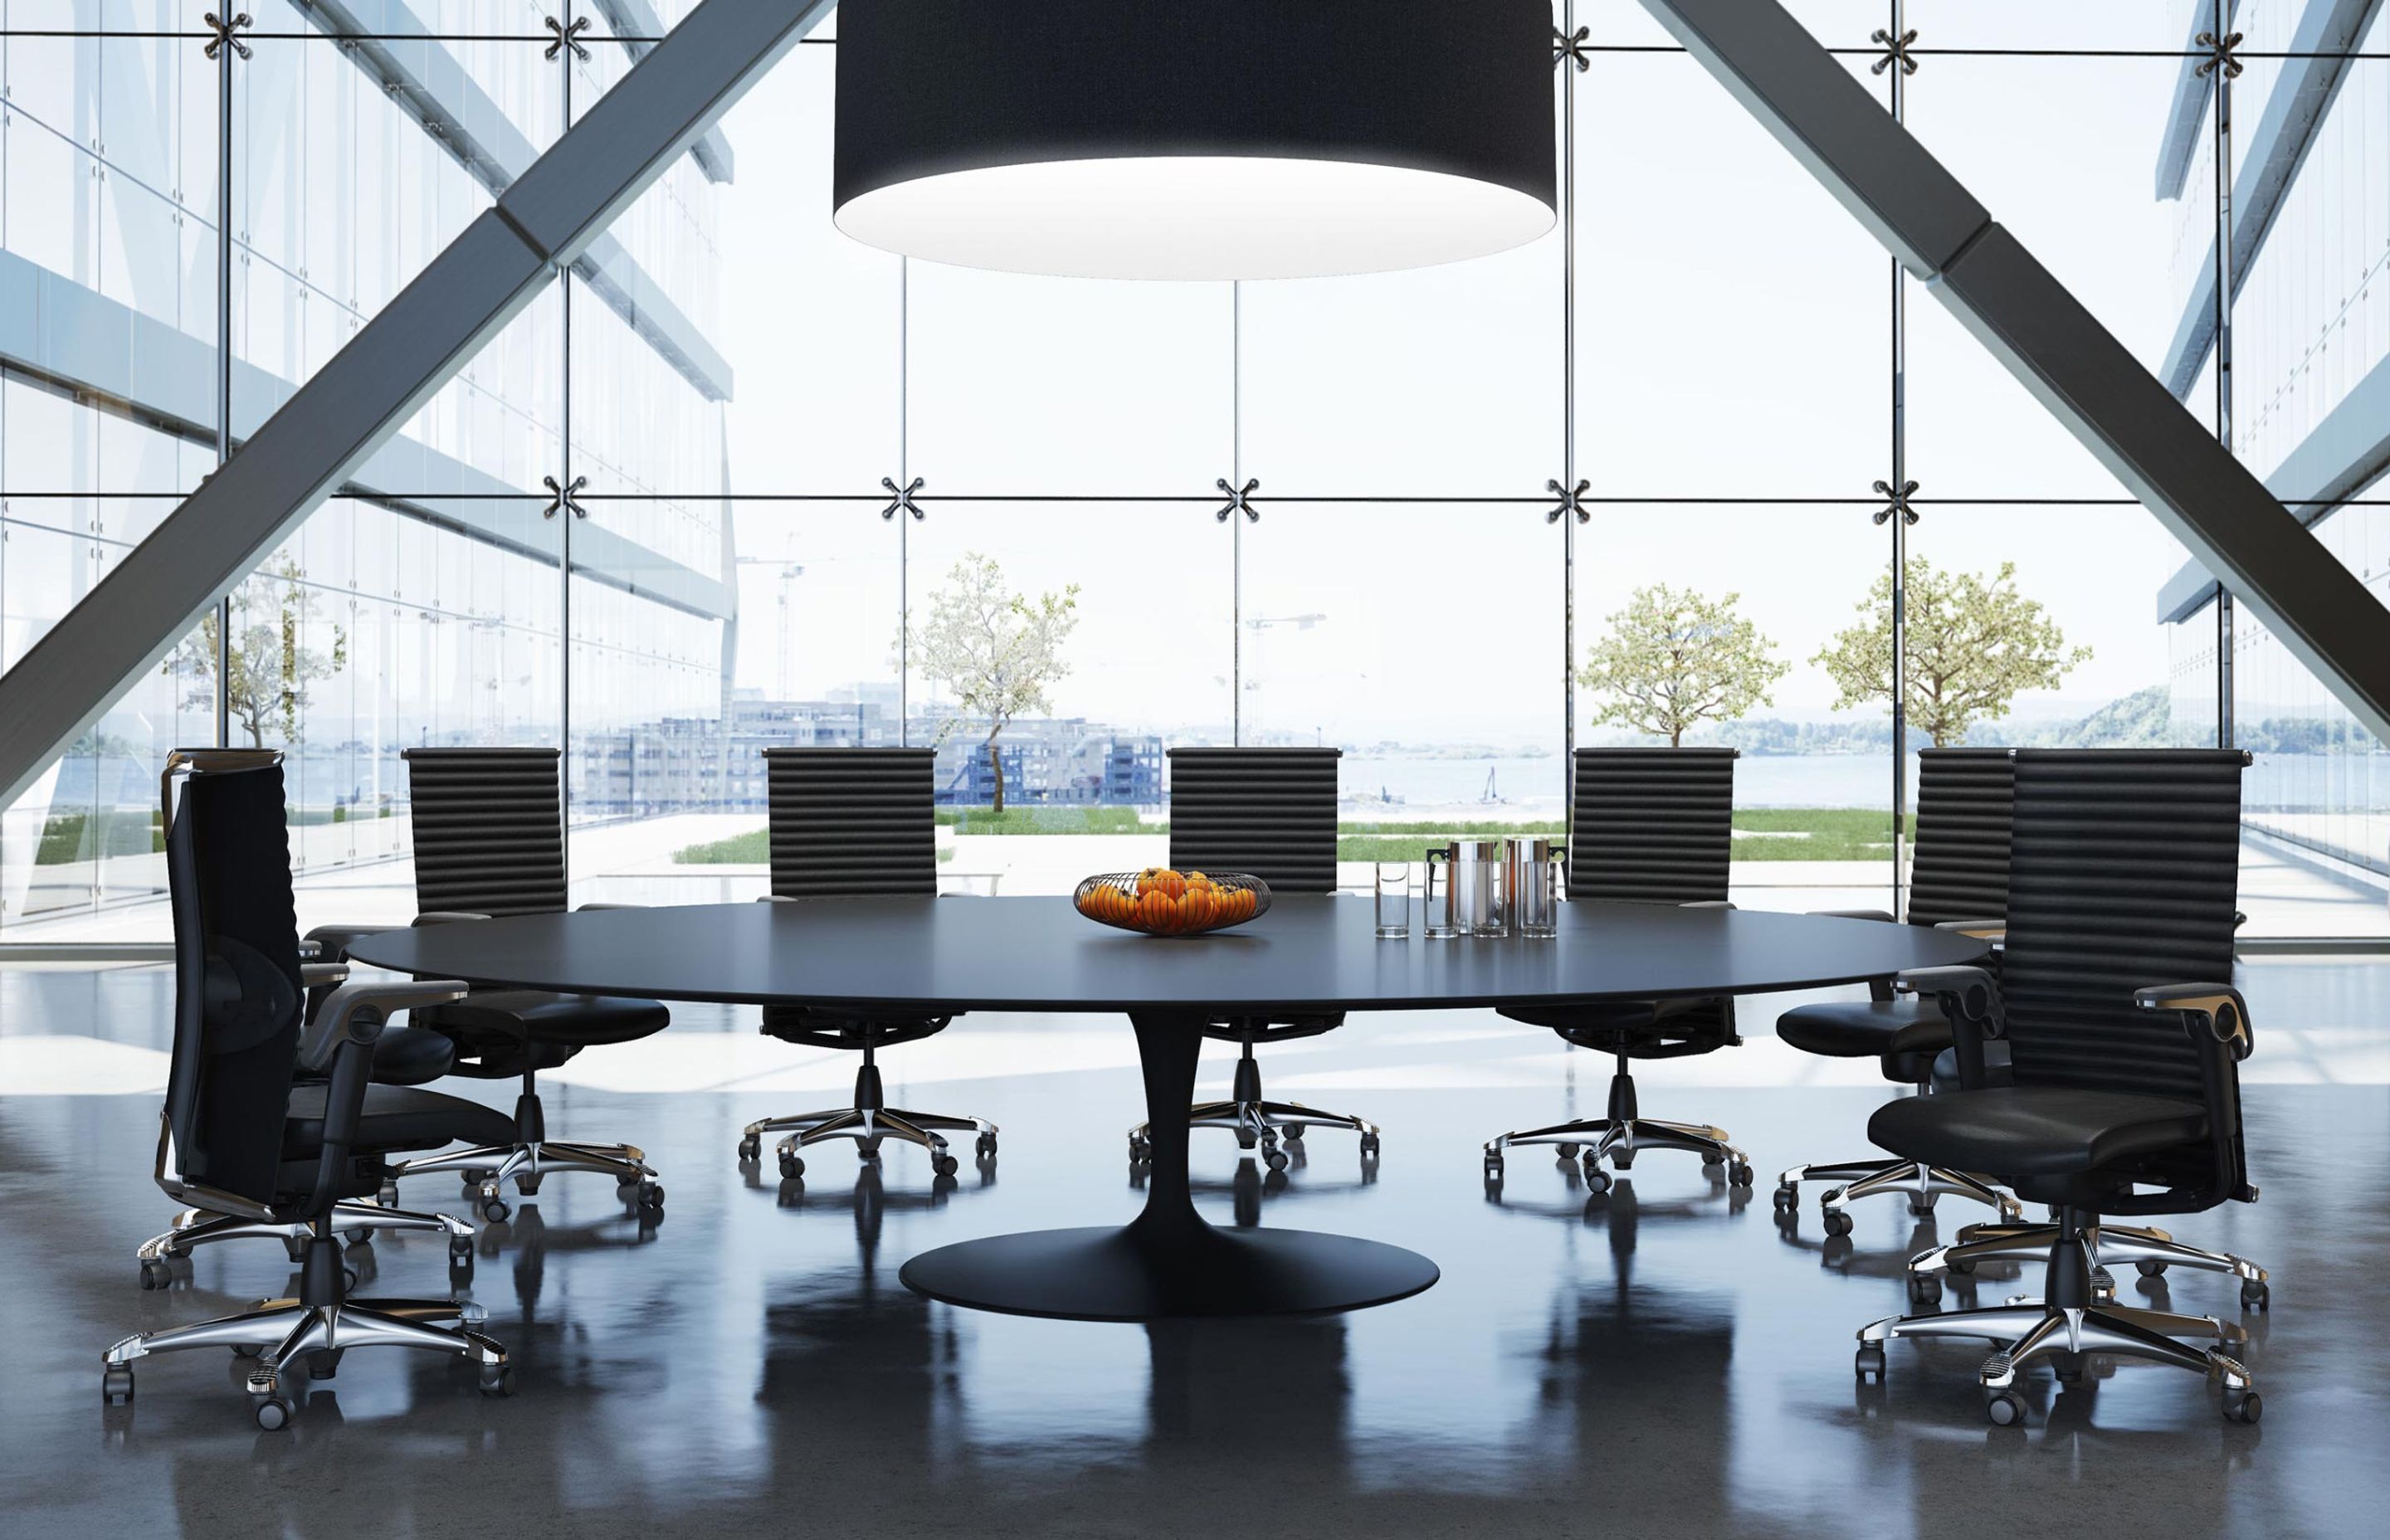 Want that board meeting feel? use this image featuring a fleet of HÅG Excellence chairs